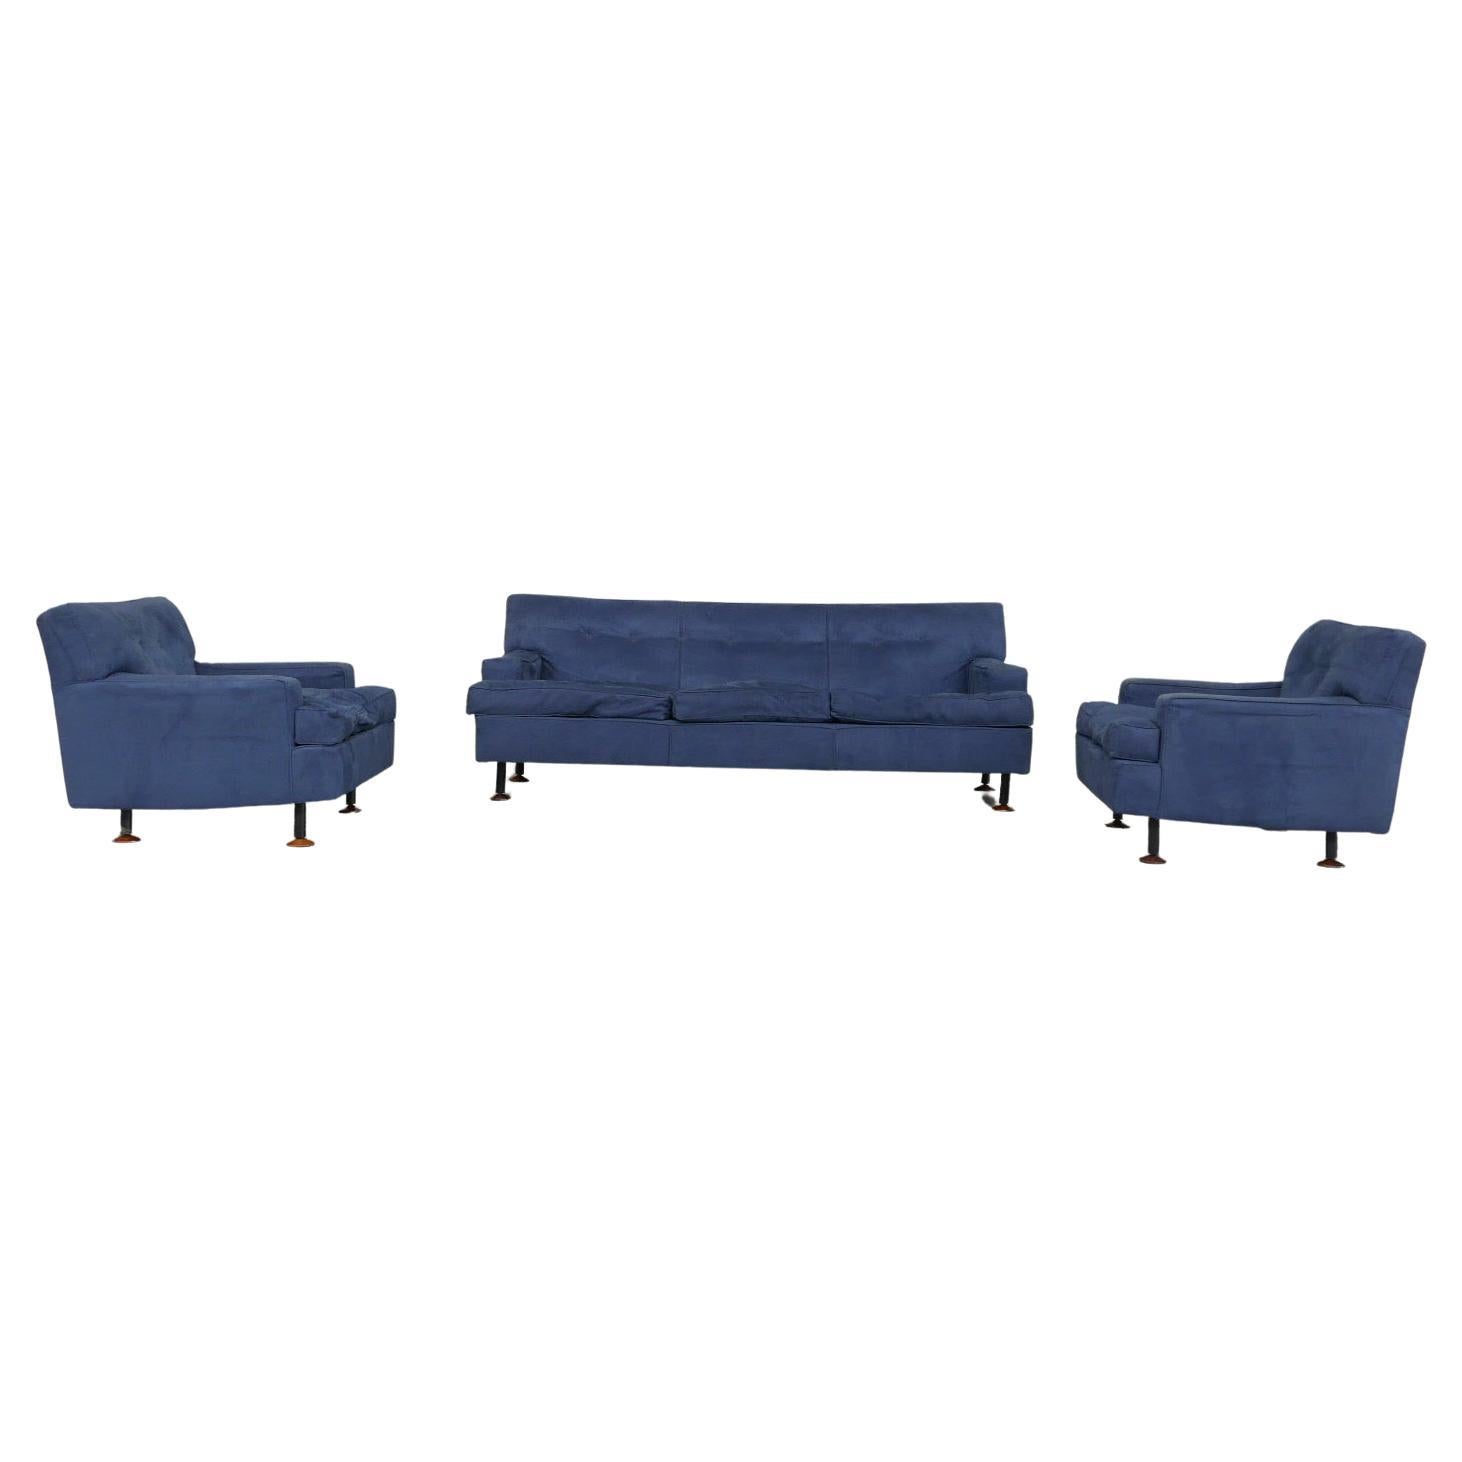 Mid-Century Marco Zanuso 'Square' Sofa and Armchairs Suite